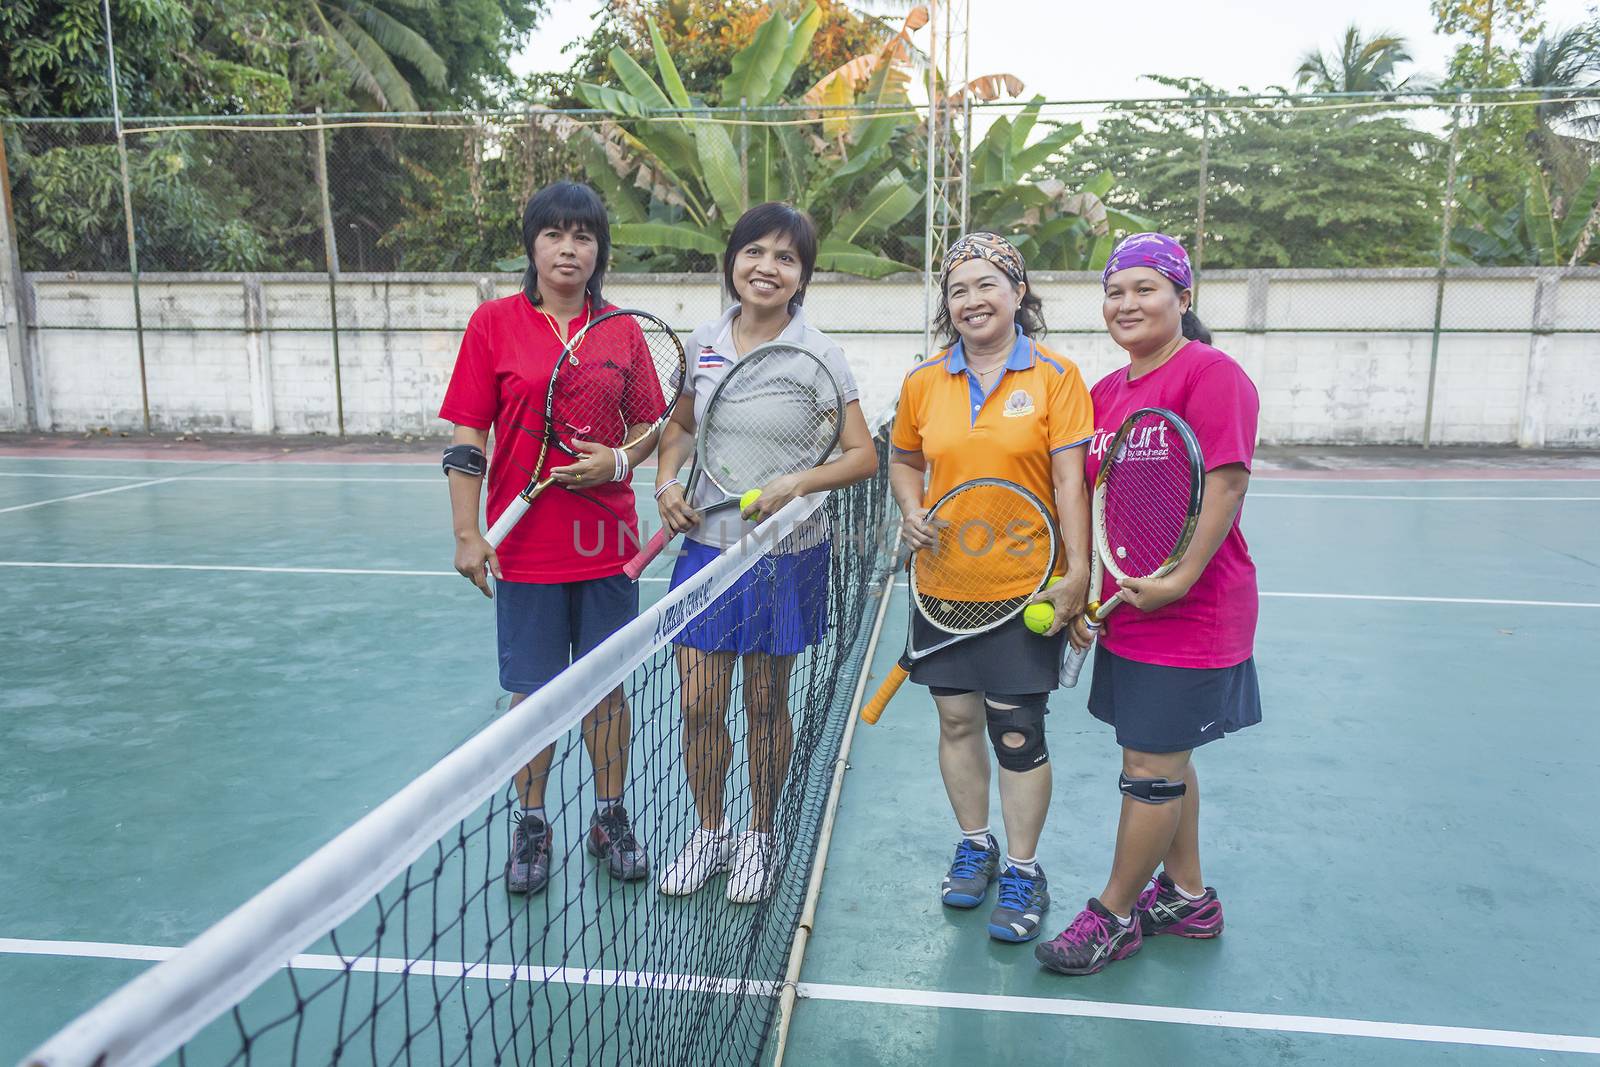 SURAT THANI, THAILAND - MARCH 1: Group of Thai tennis players holding rackets at Chaiya tennis court on March 1, 2014 in Surat Thani, Thailand.